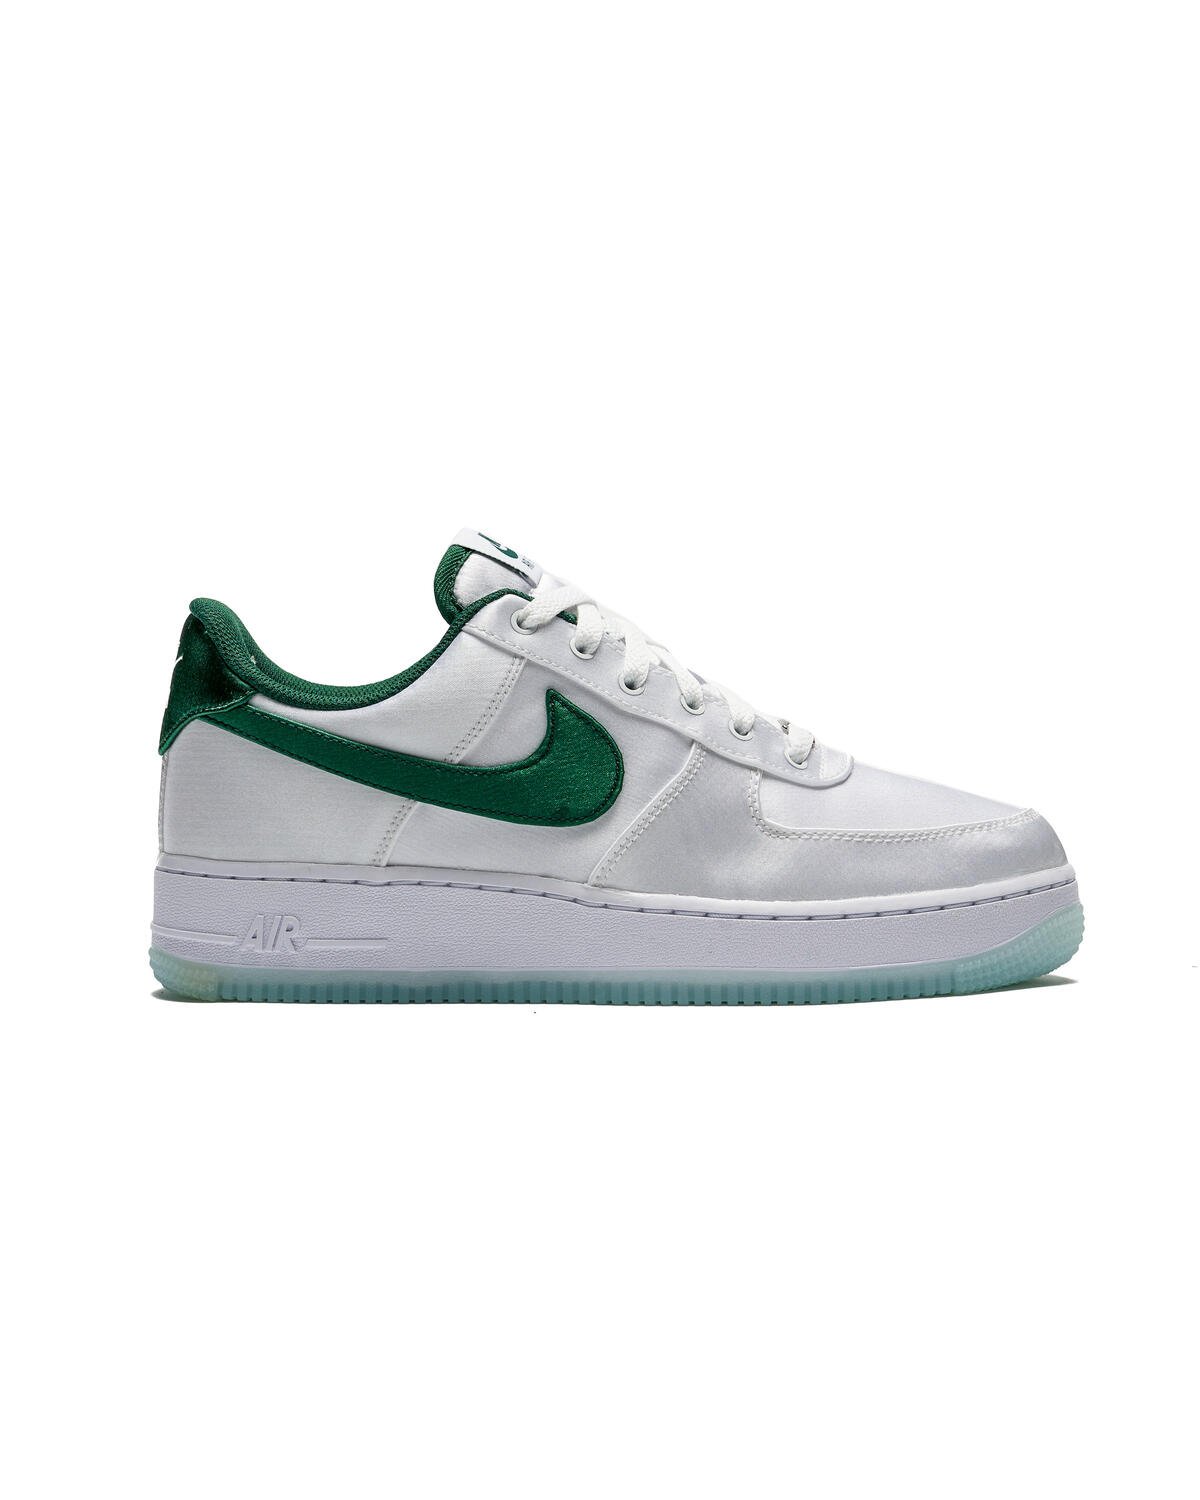 Women's shoes Nike Air Force 1 '07 White/ Sport Green-Sport Green-Ice